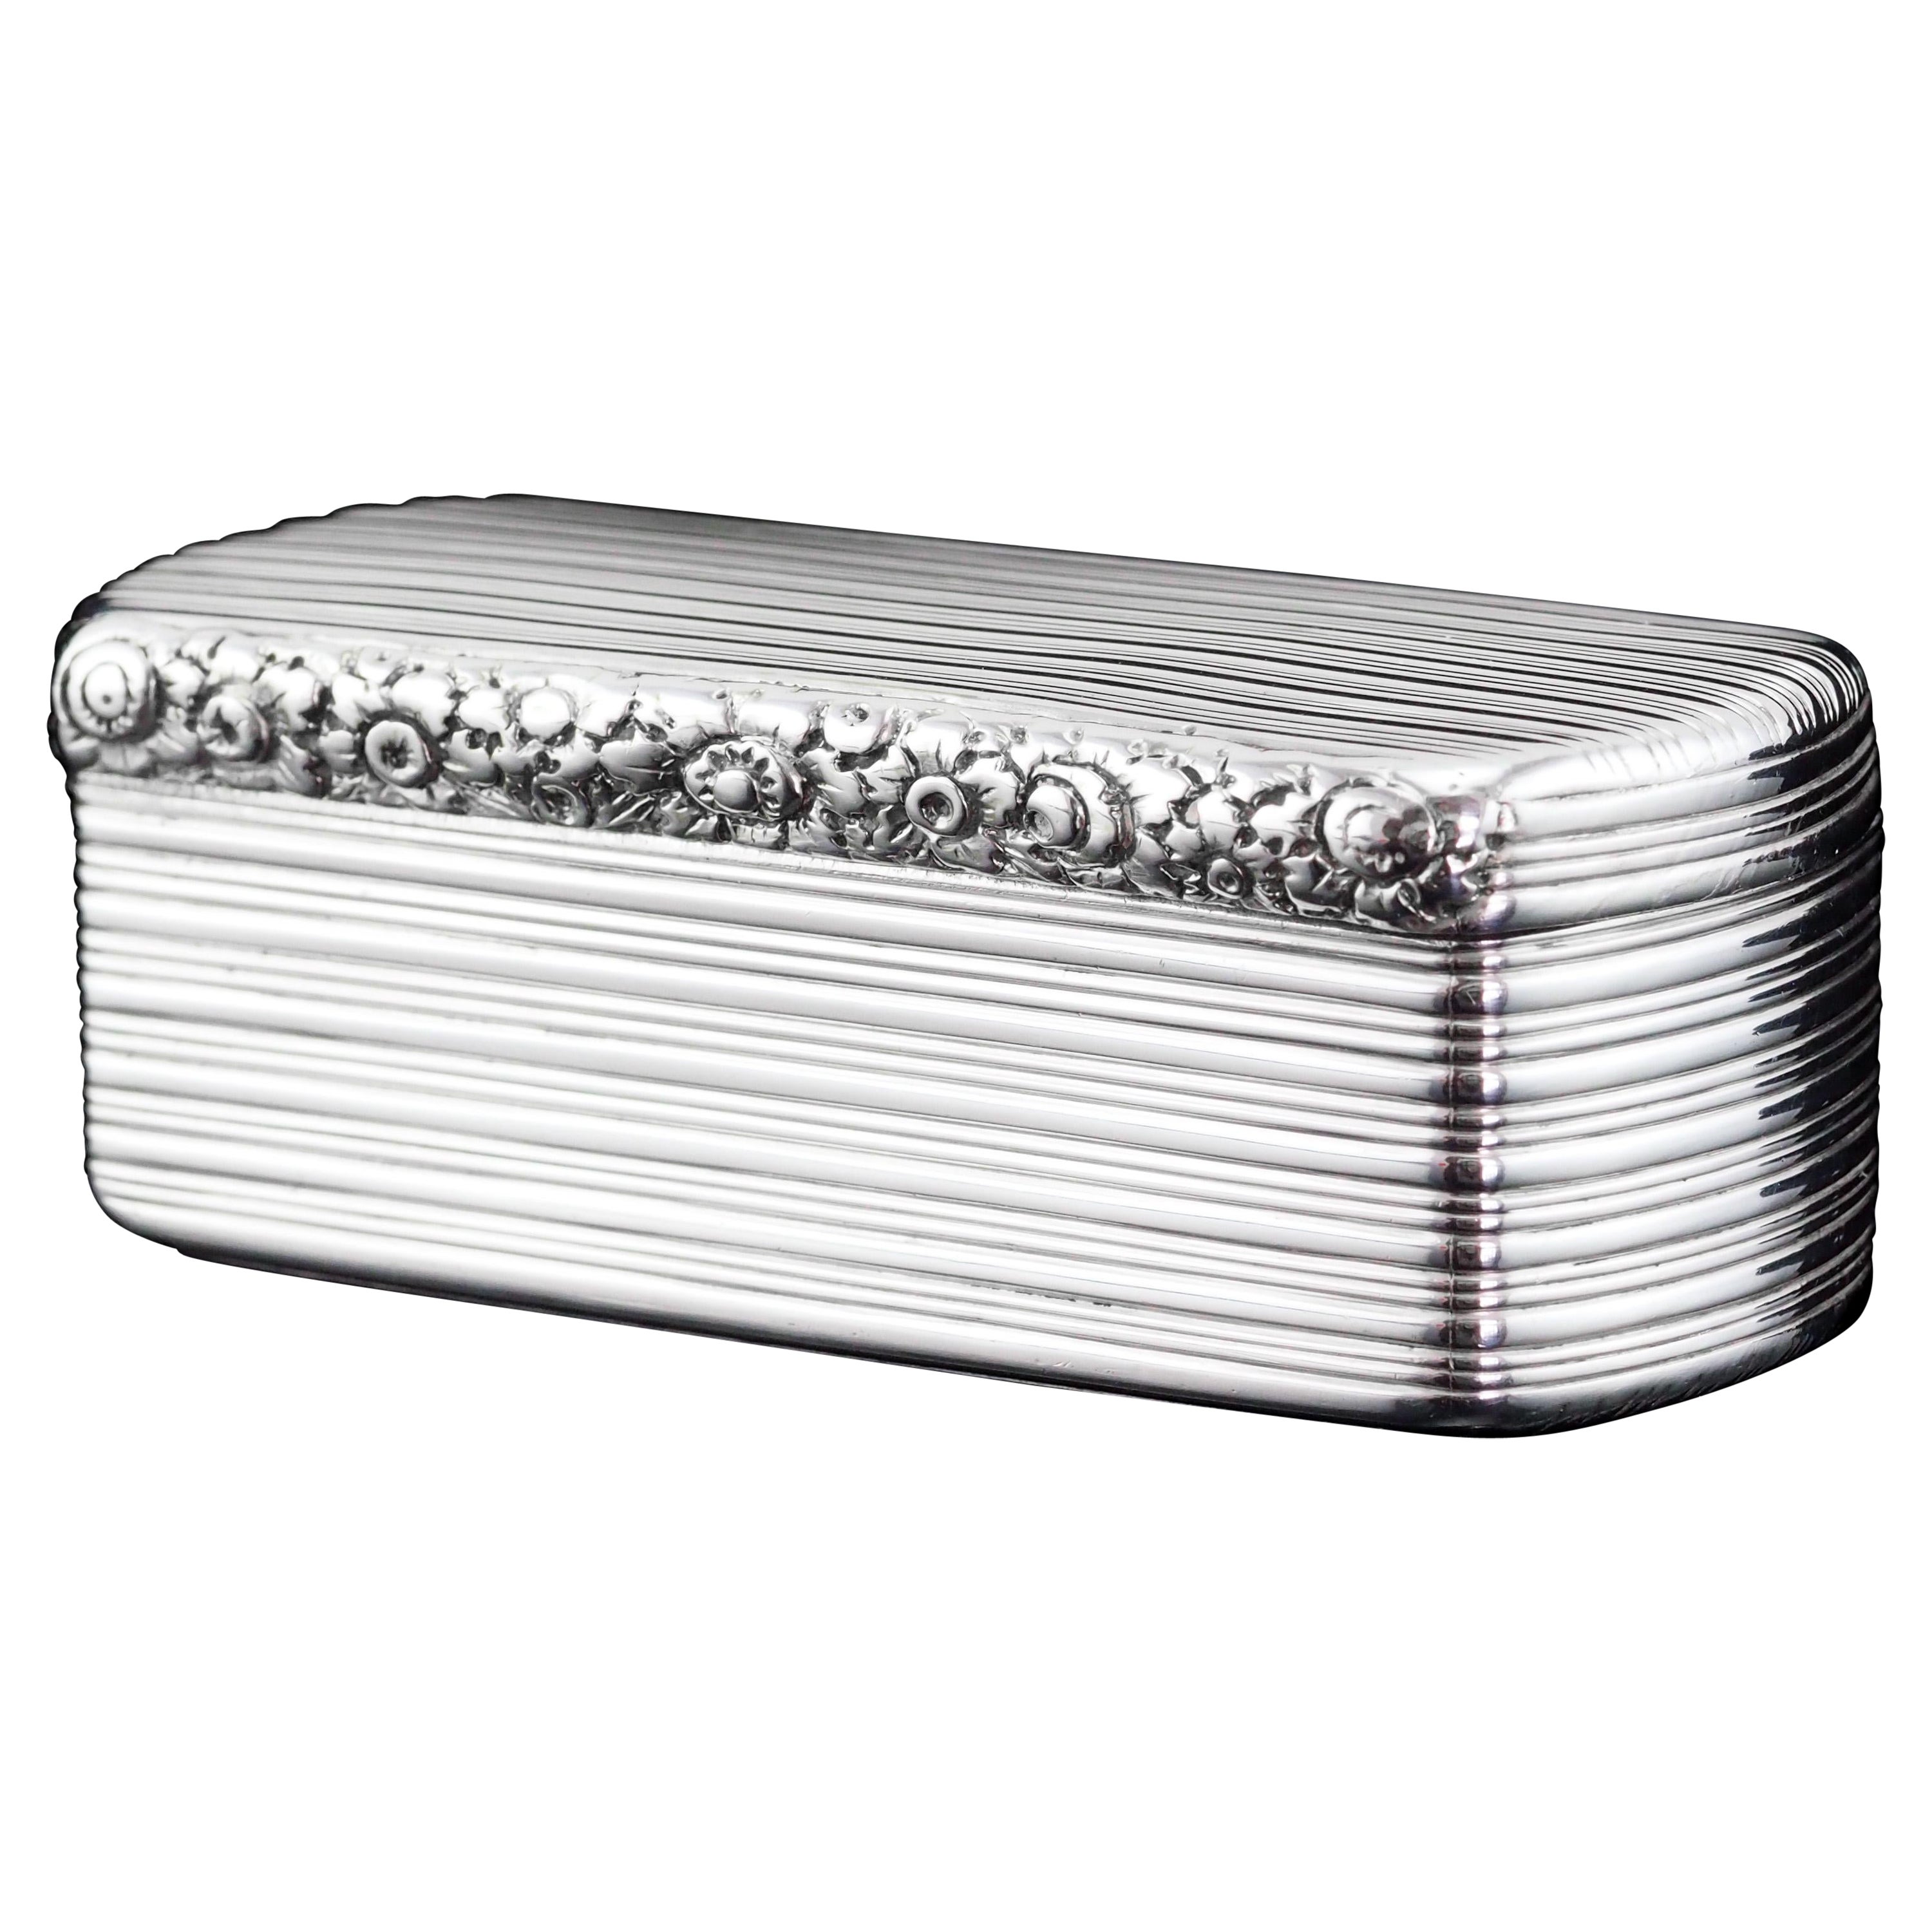 Antique Georgian Solid Silver Snuff Box Oblong Shape with Reeded Lines - Charles